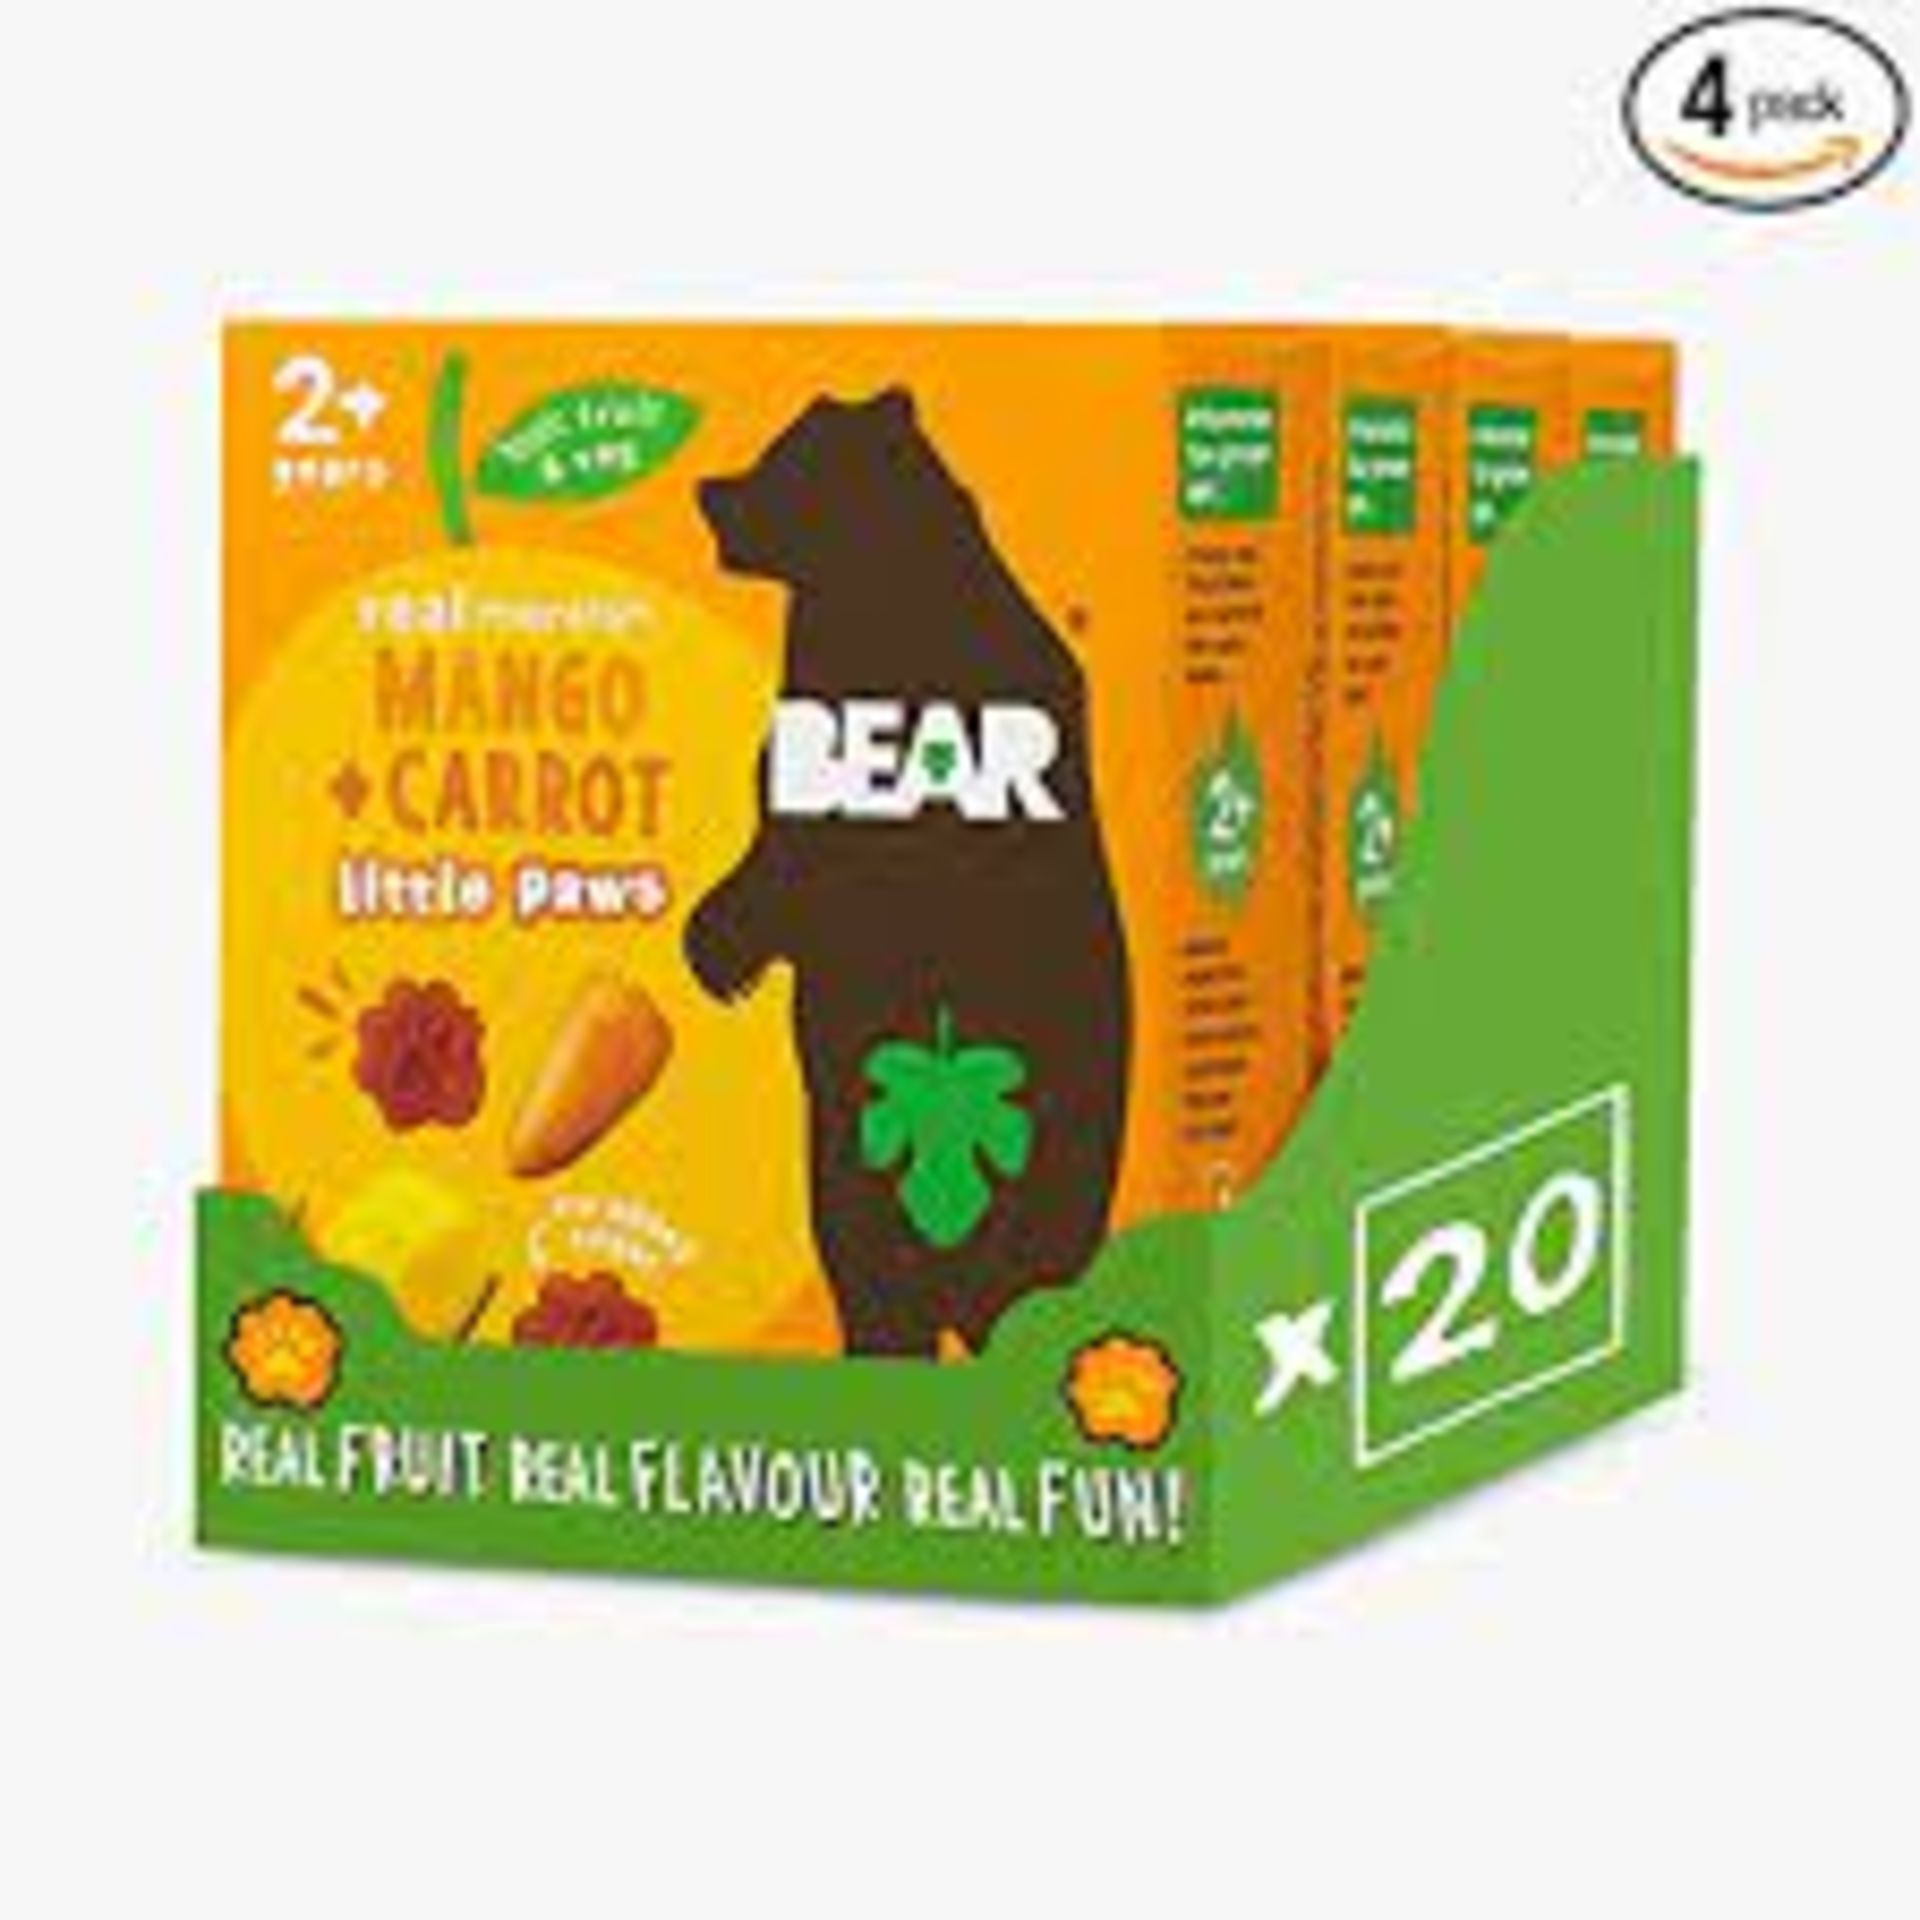 **RRP £1572 (Approx. Count 96) spW33i6628q  32 x BEAR Mango & Carrot Pure Fruit & Veg Paws -